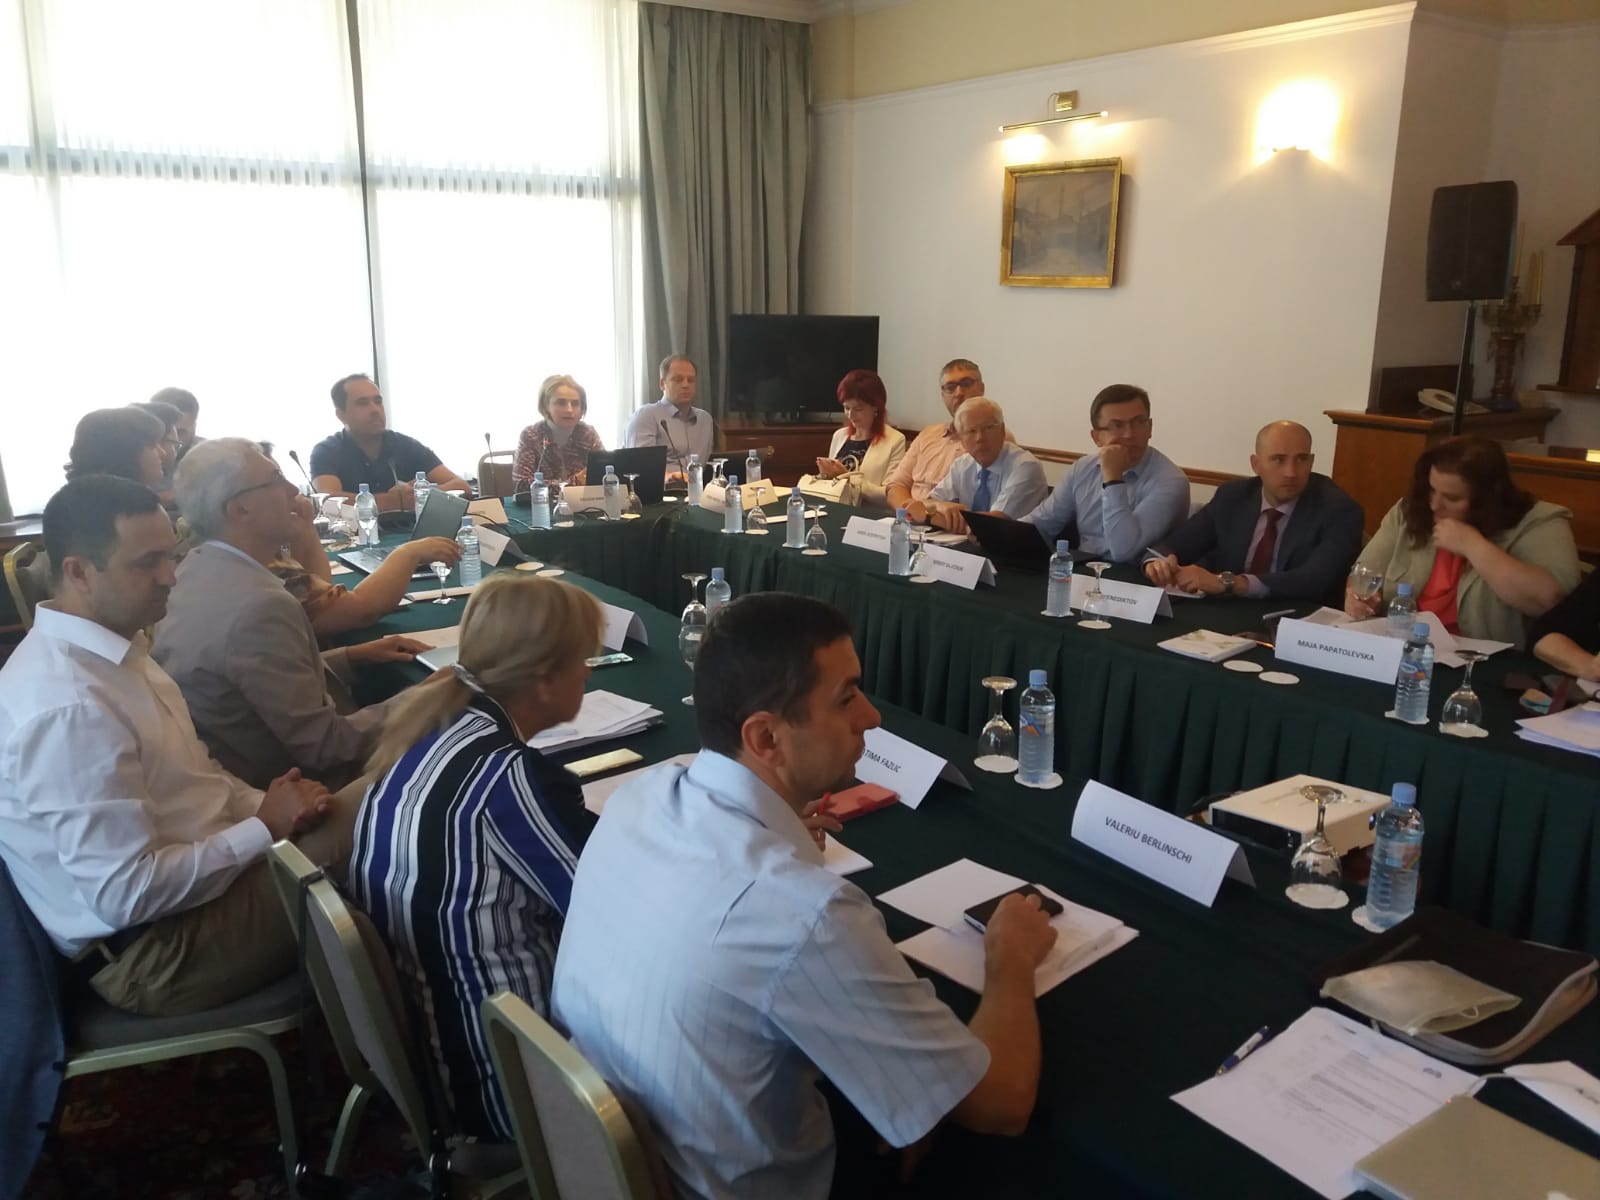 2nd Annual Meeting of the Central Eeastern European Labour Experts Network